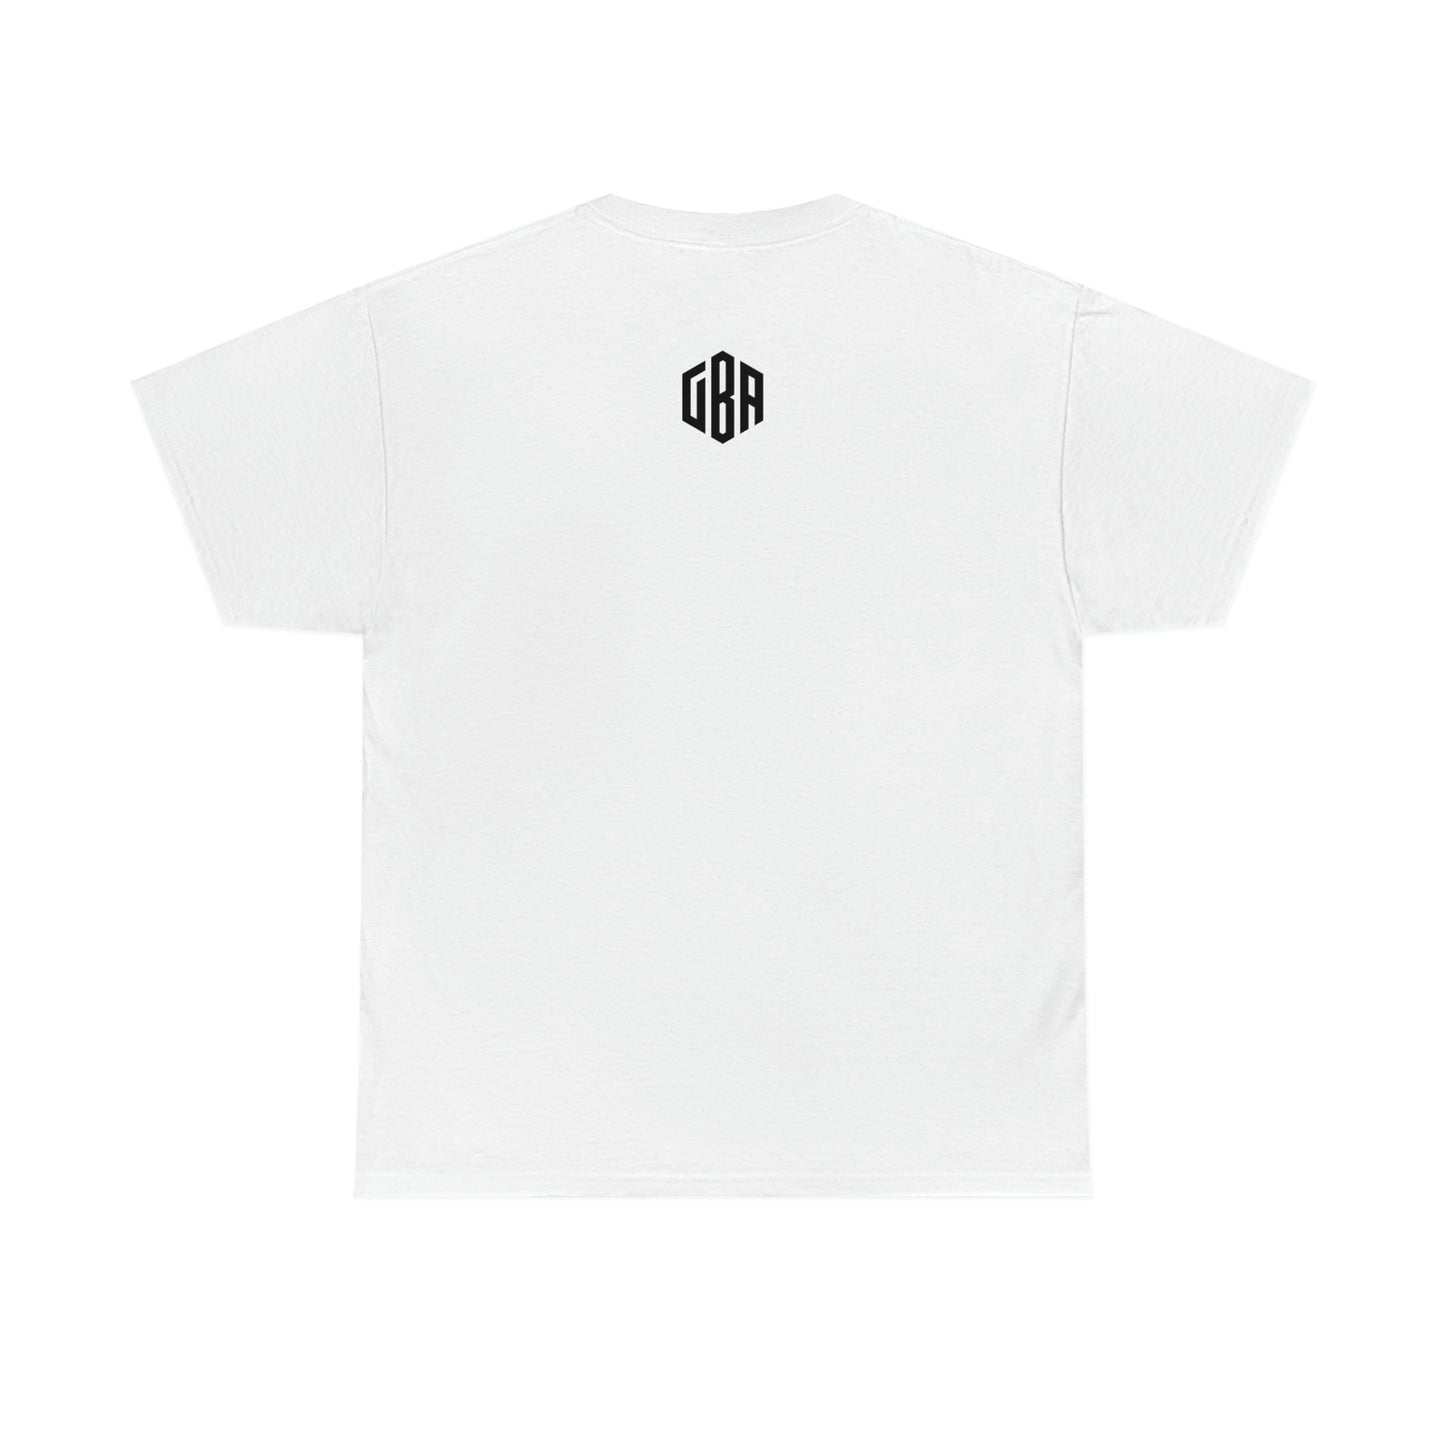 Only GBA’s Mens Heavy Cotton Tee